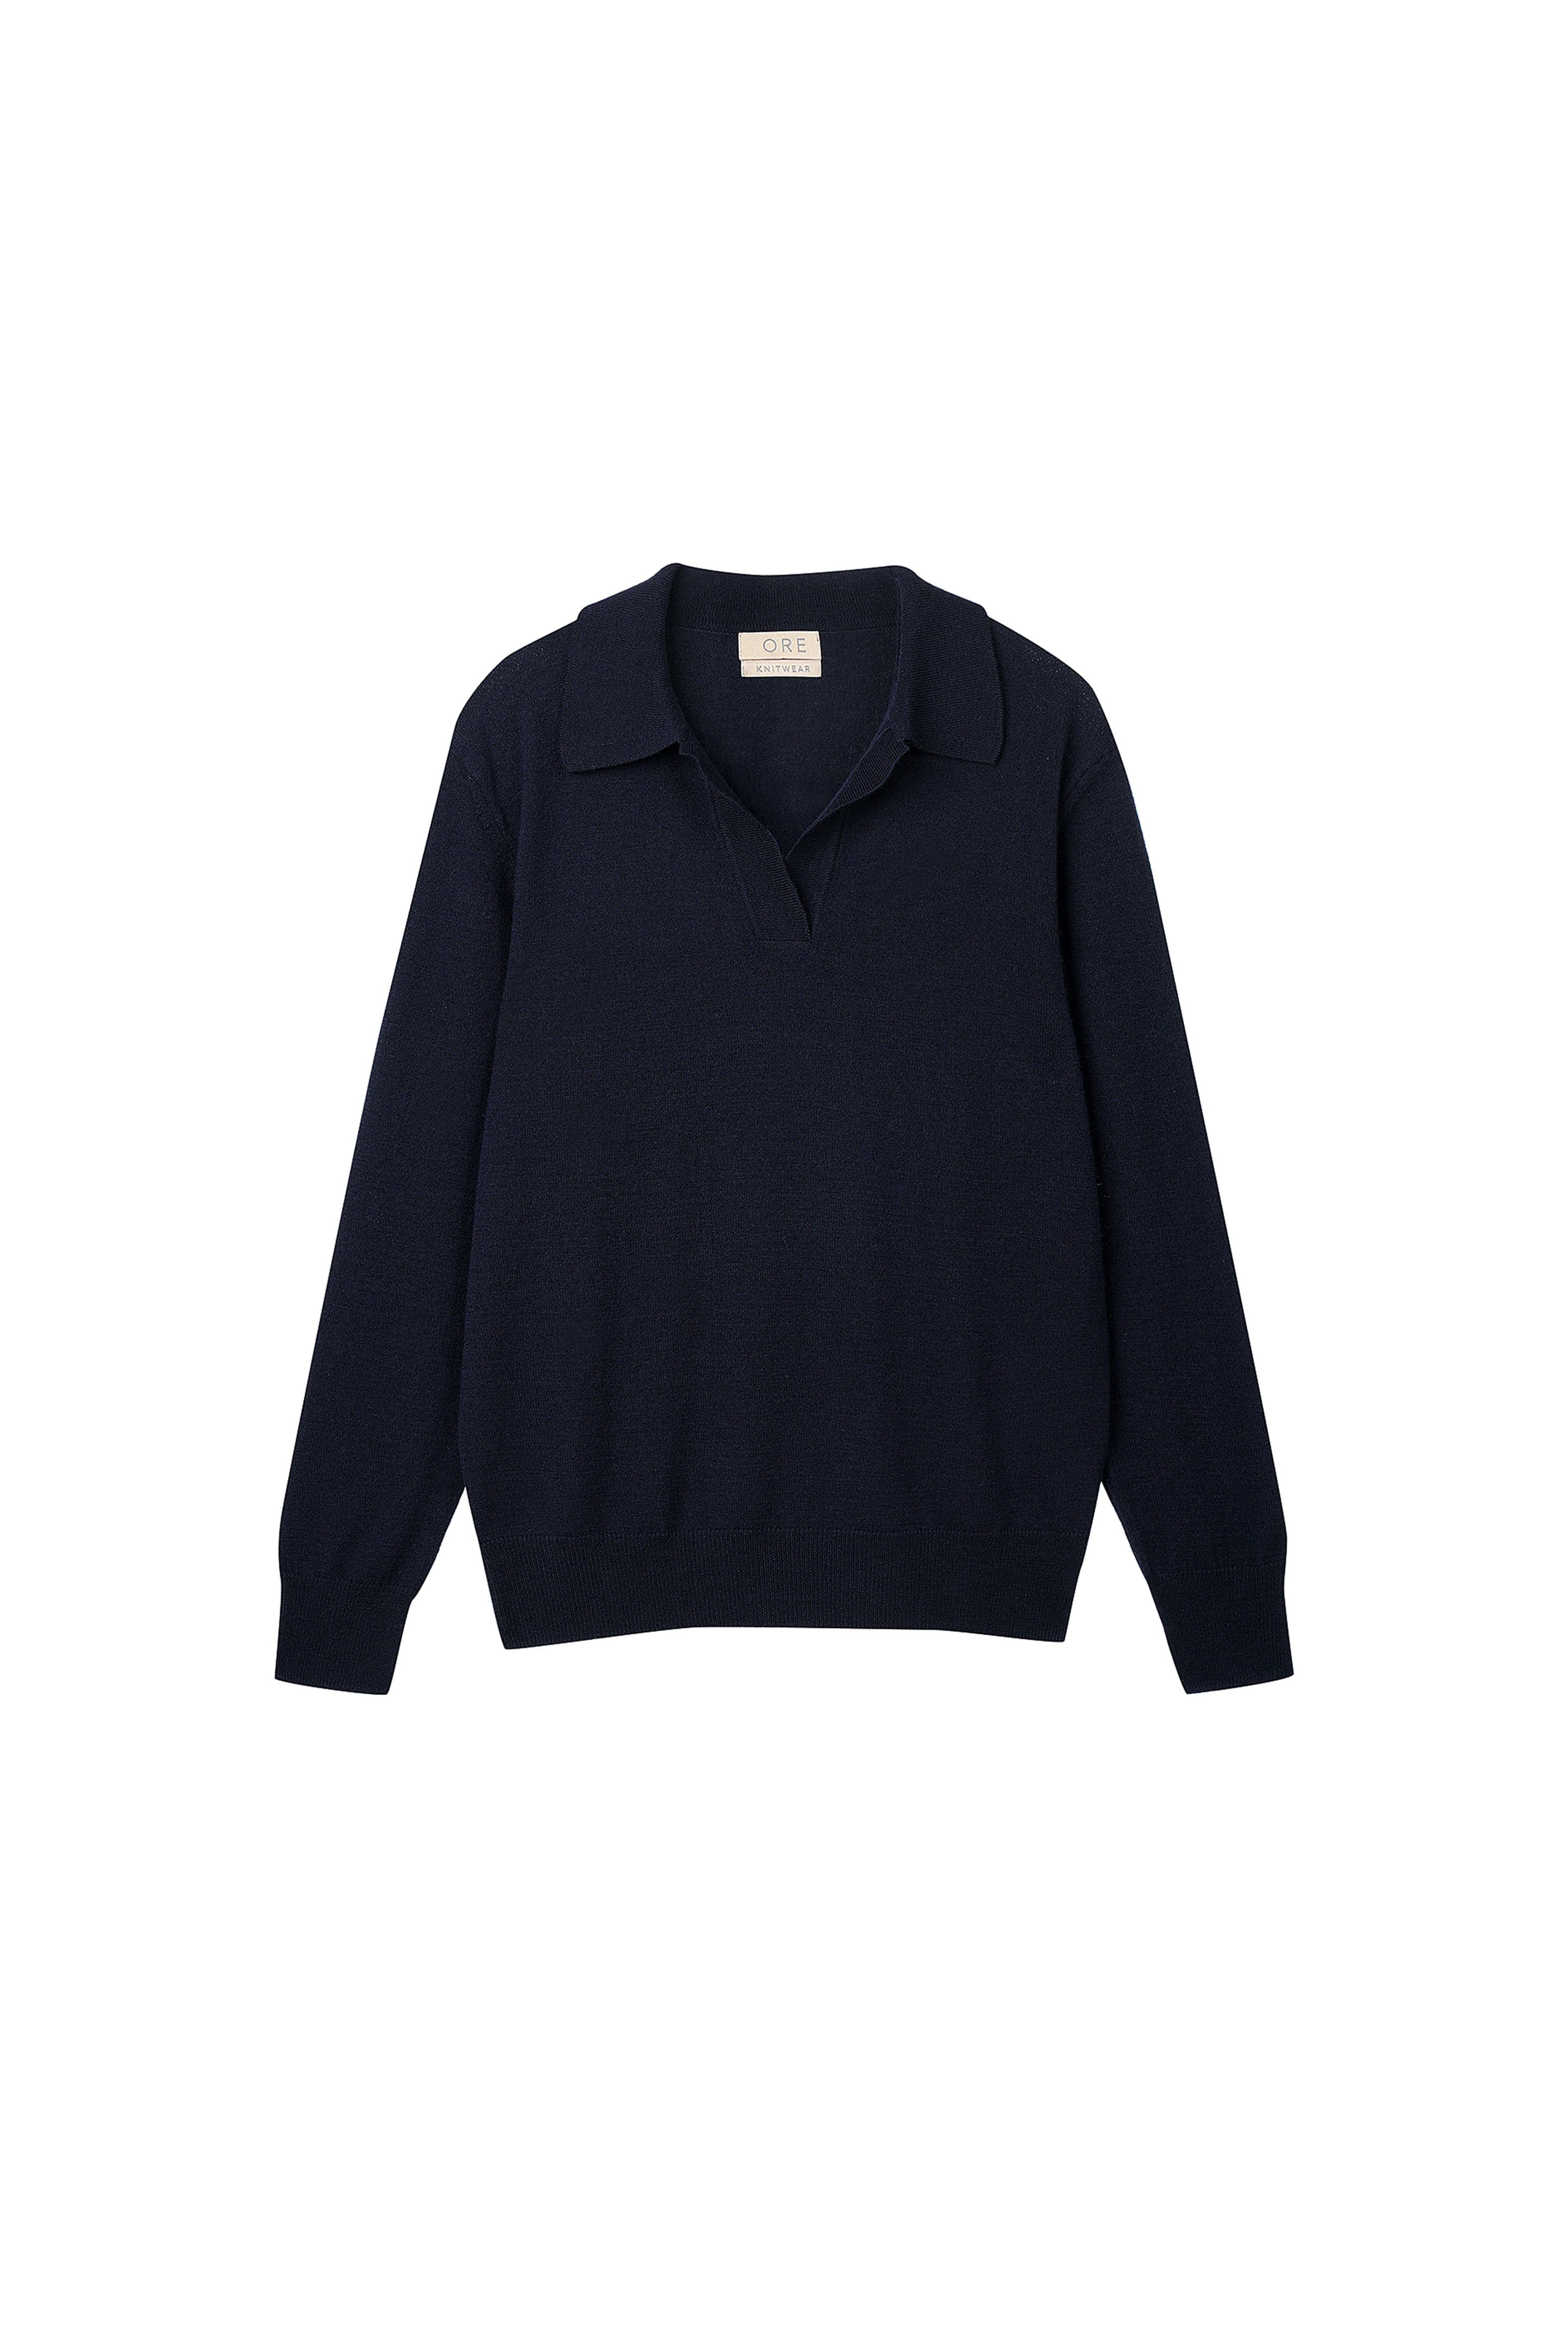 2nd) Knitted Collar Pull-over Navy